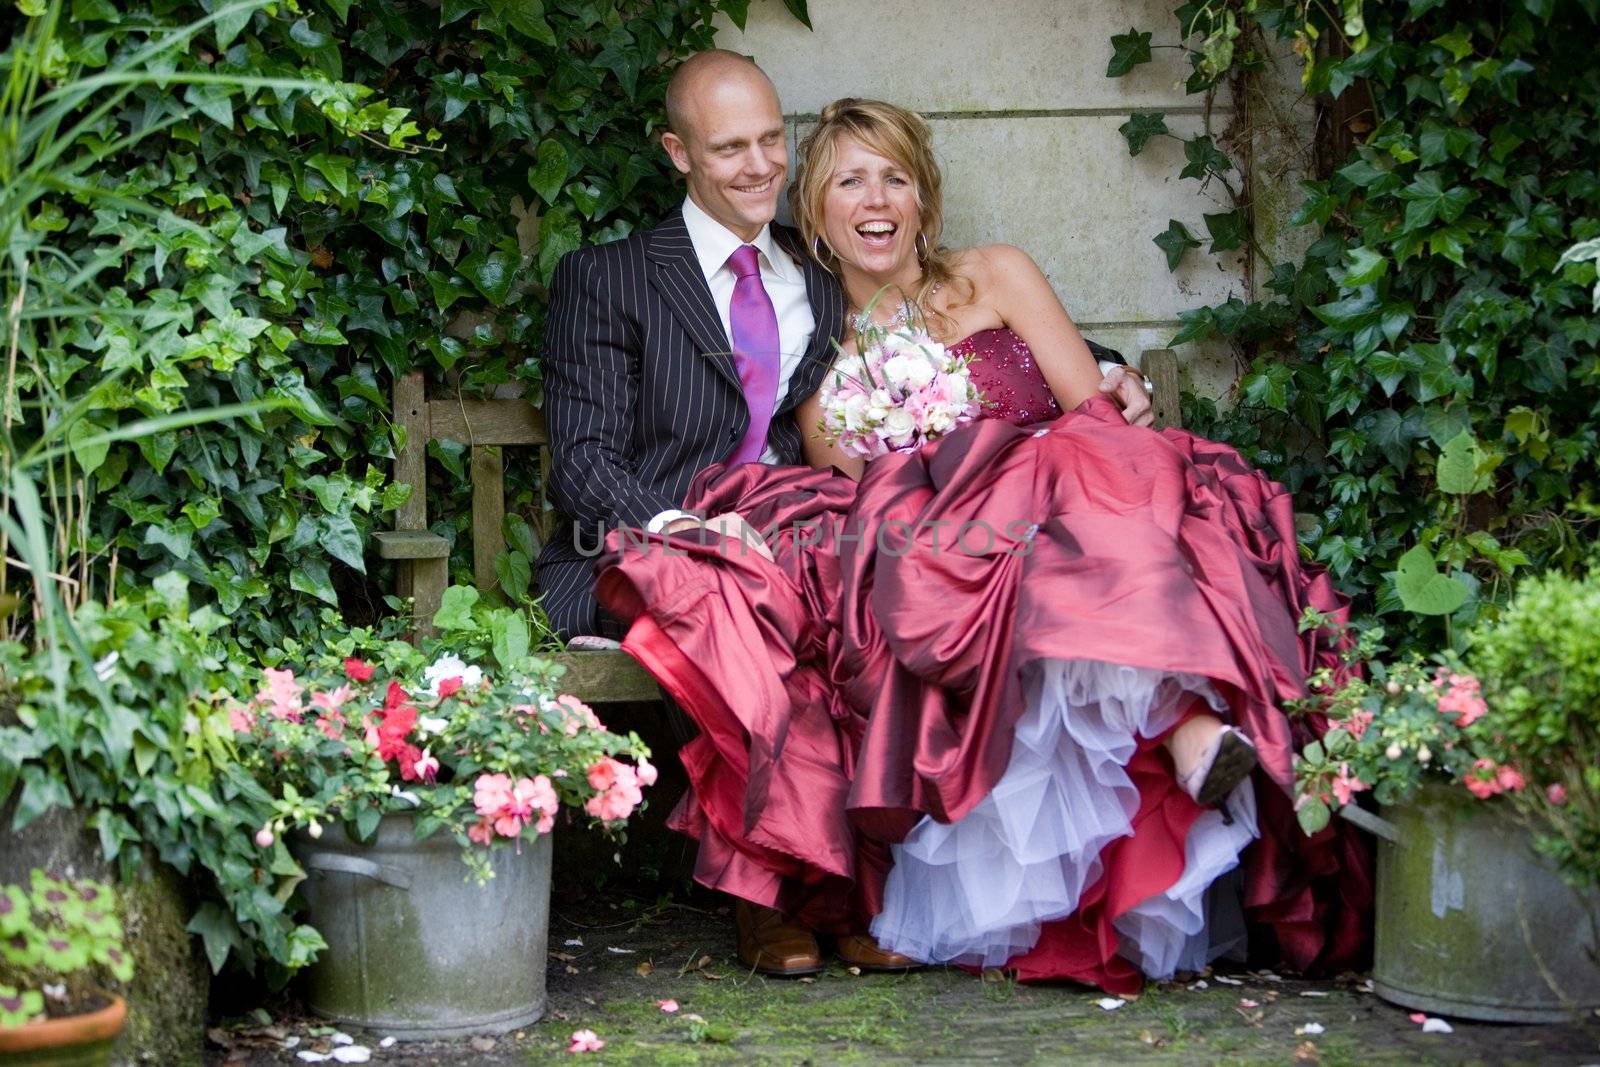 Lovely bride and groom sitting in a romantic setting clearly having fun